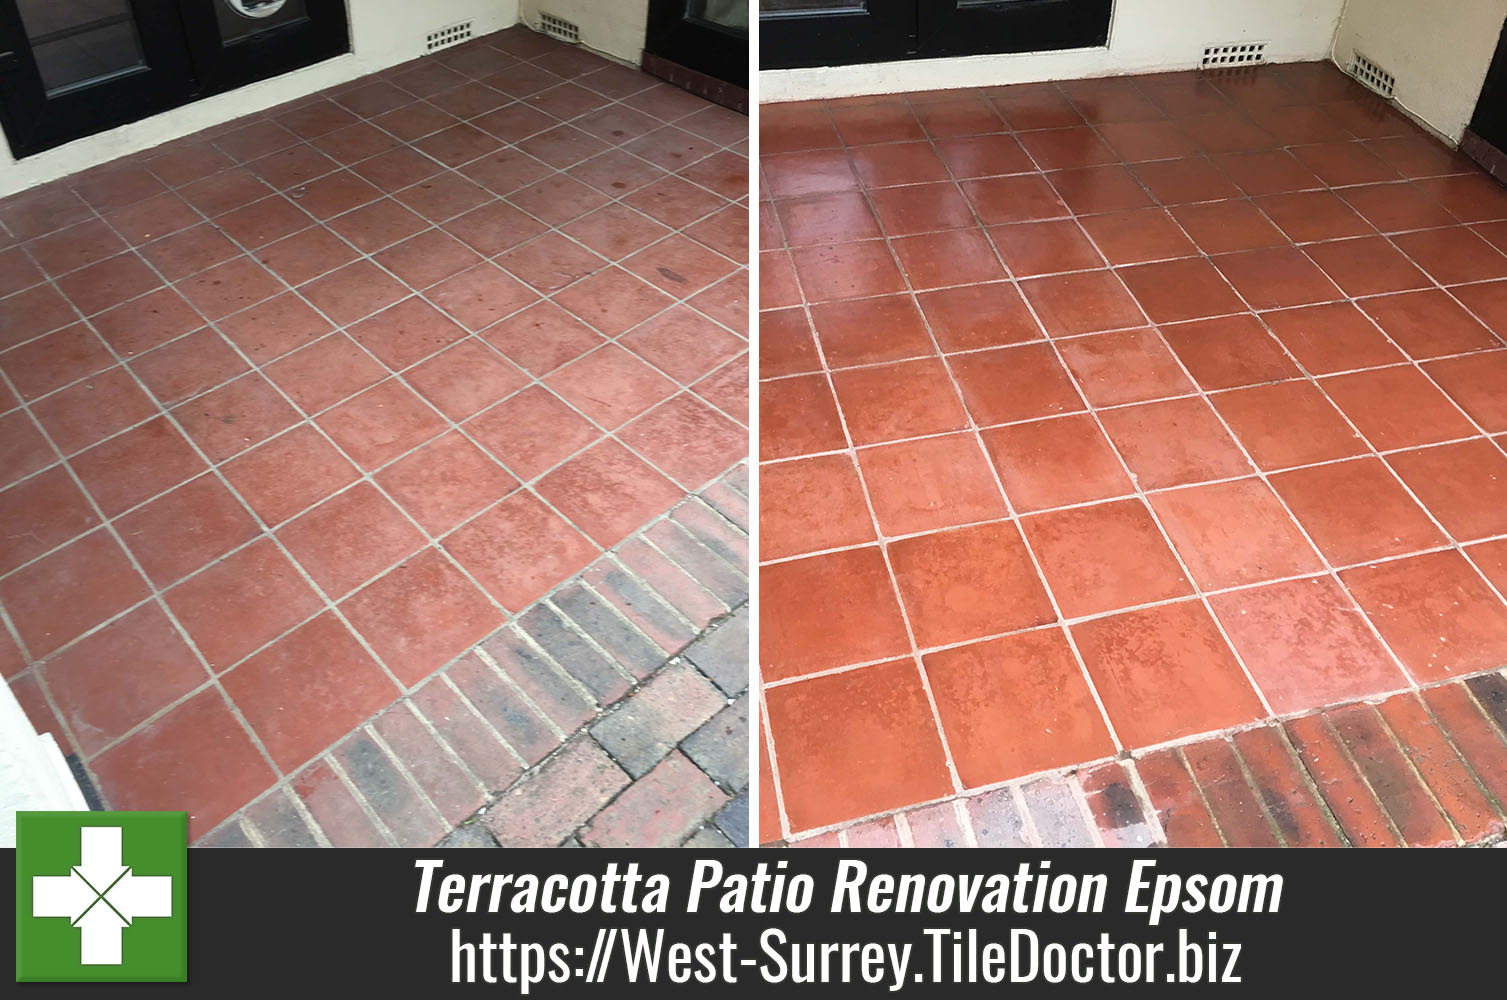 Terracotta-Patio-Floor-Before-and-After-Renovation-Epsom